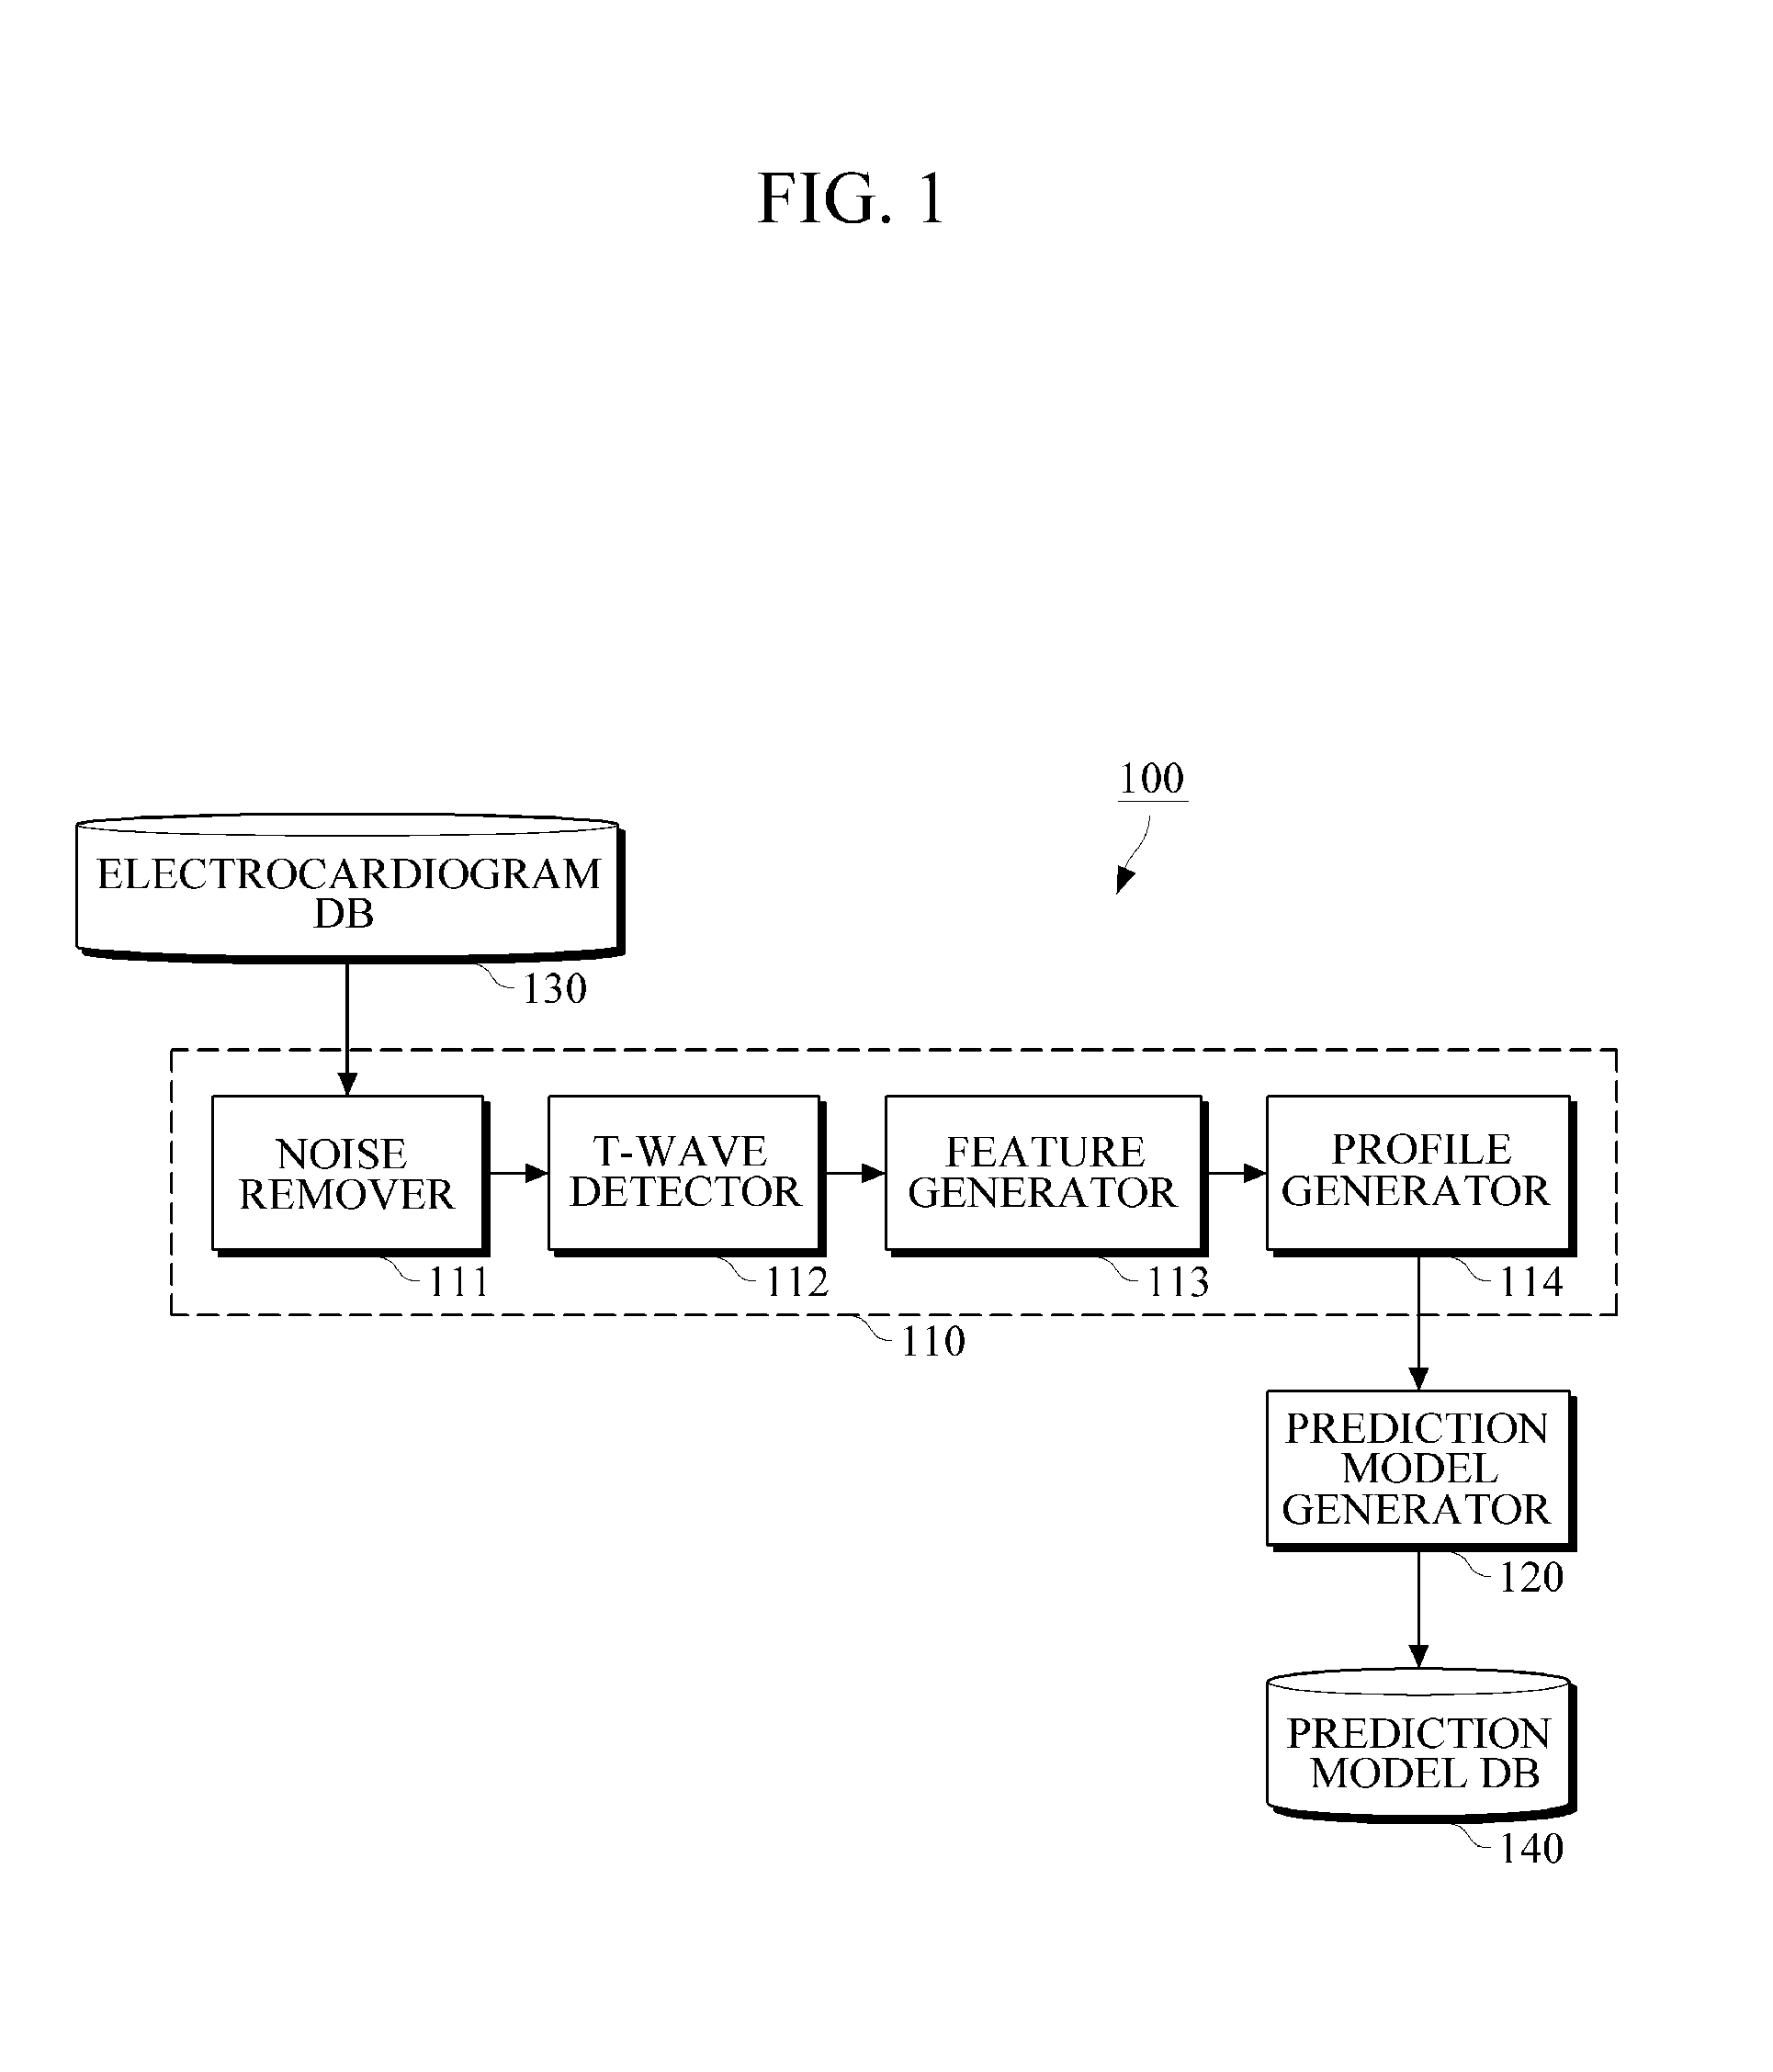 Apparatus and method for generating atrial fibrillation prediction model, and apparatus and method for predicting atrial fibrillation